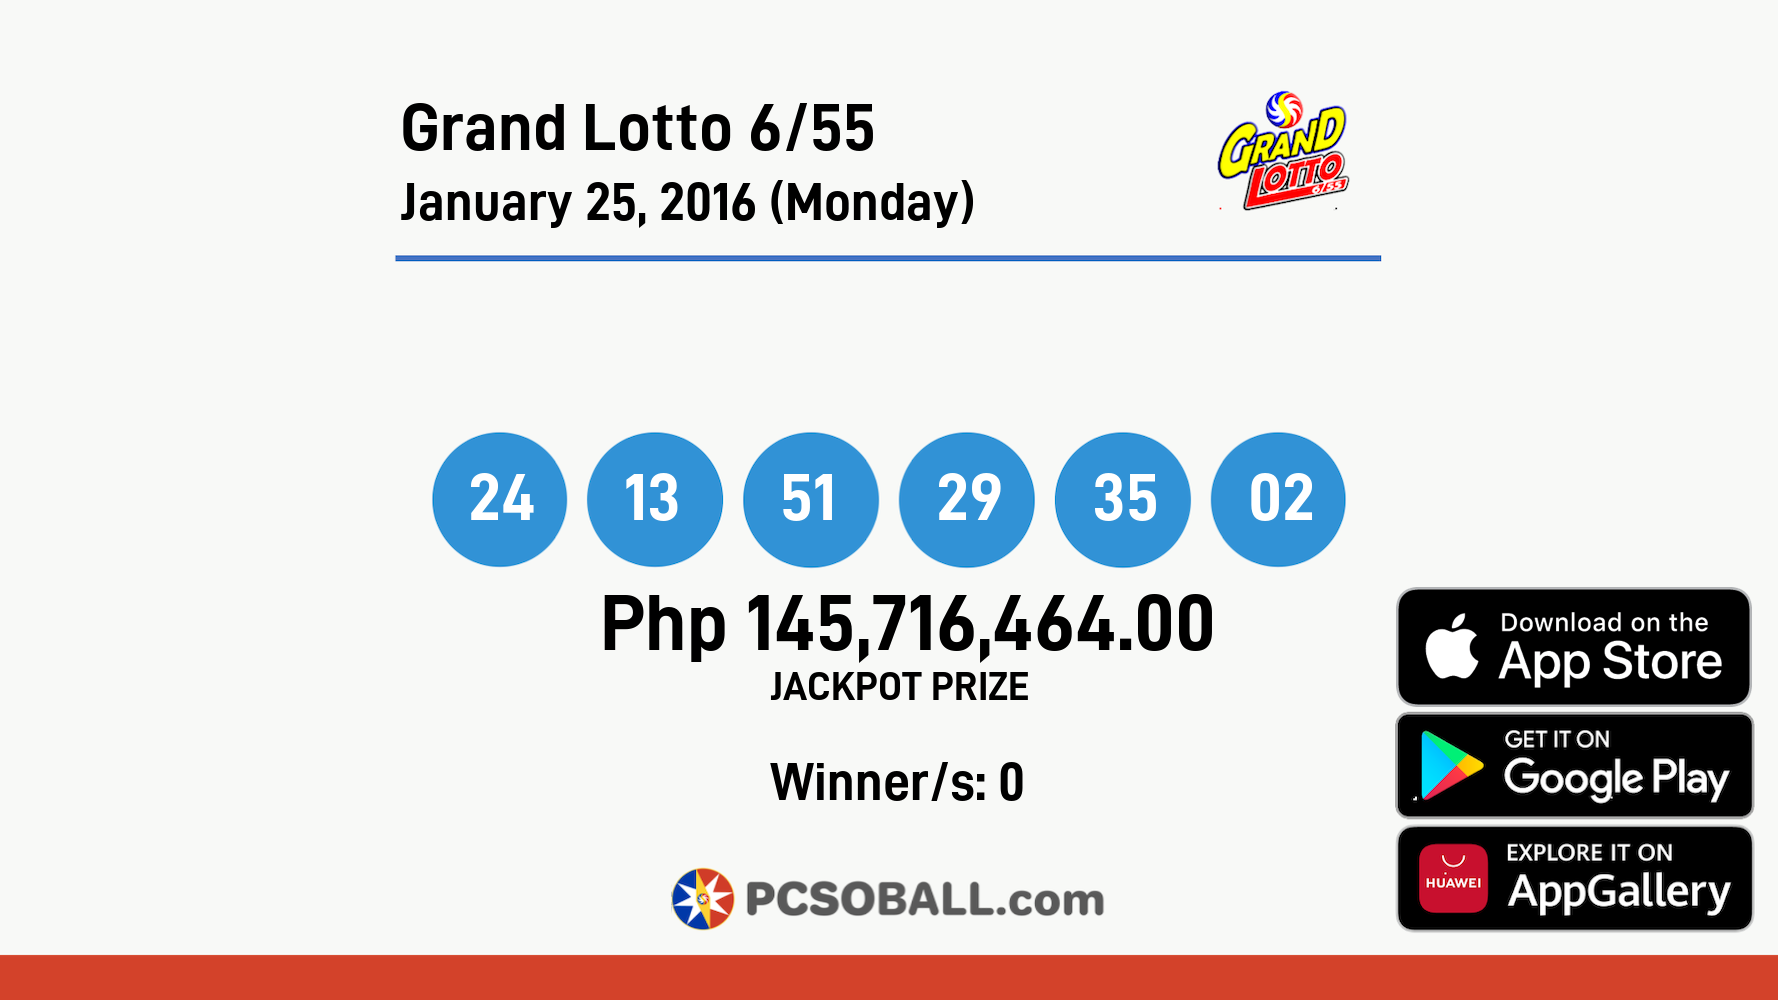 Grand Lotto 6/55 January 25, 2016 (Monday) Result